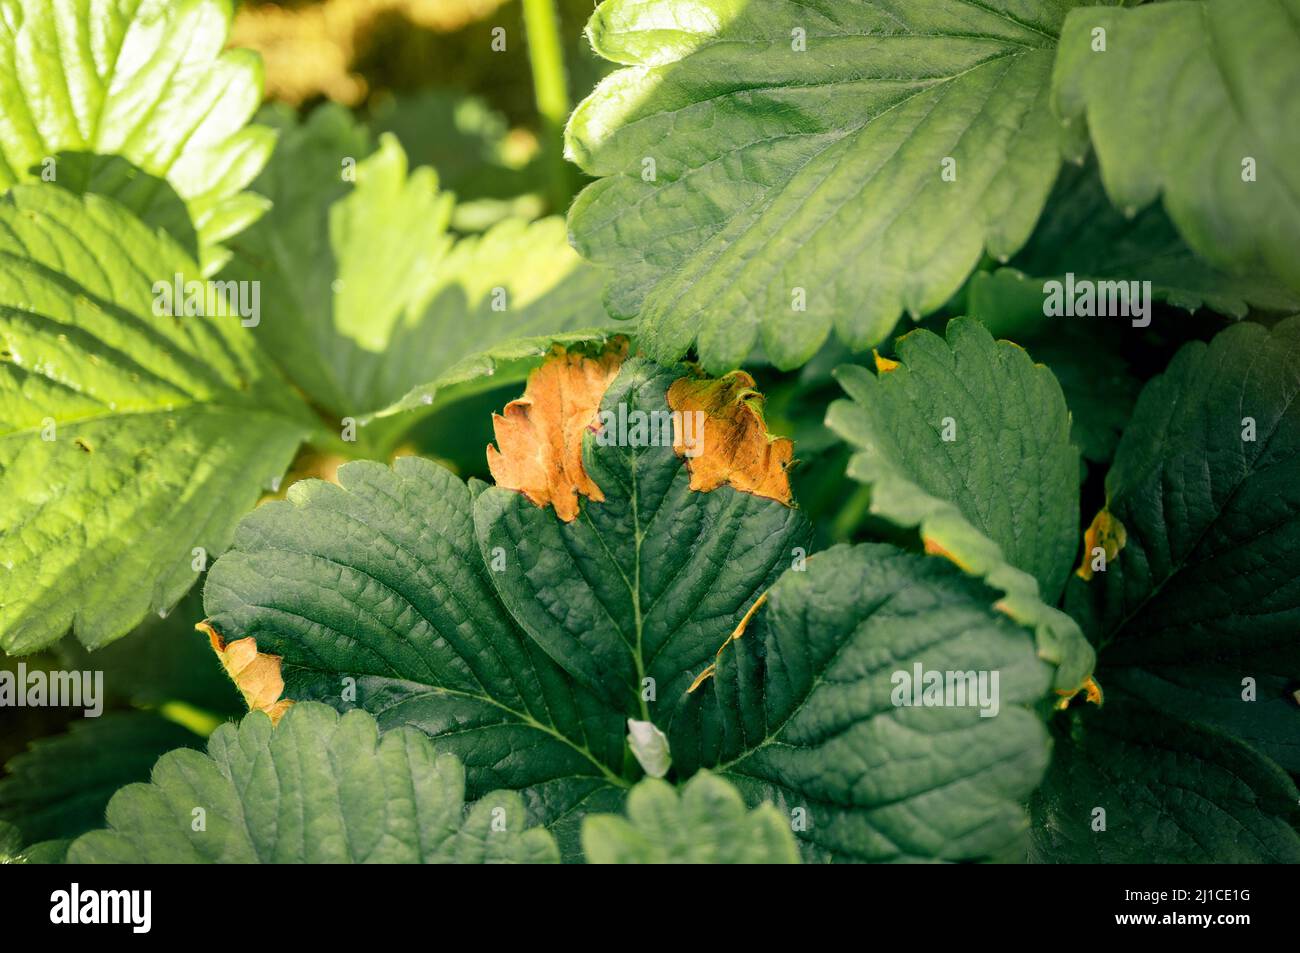 Strawberry leaf spot is a widespread fungal disease caused by the fungus Mycosphaerella fragariae. Symptoms on the foliage of garden strawberries. Stock Photo